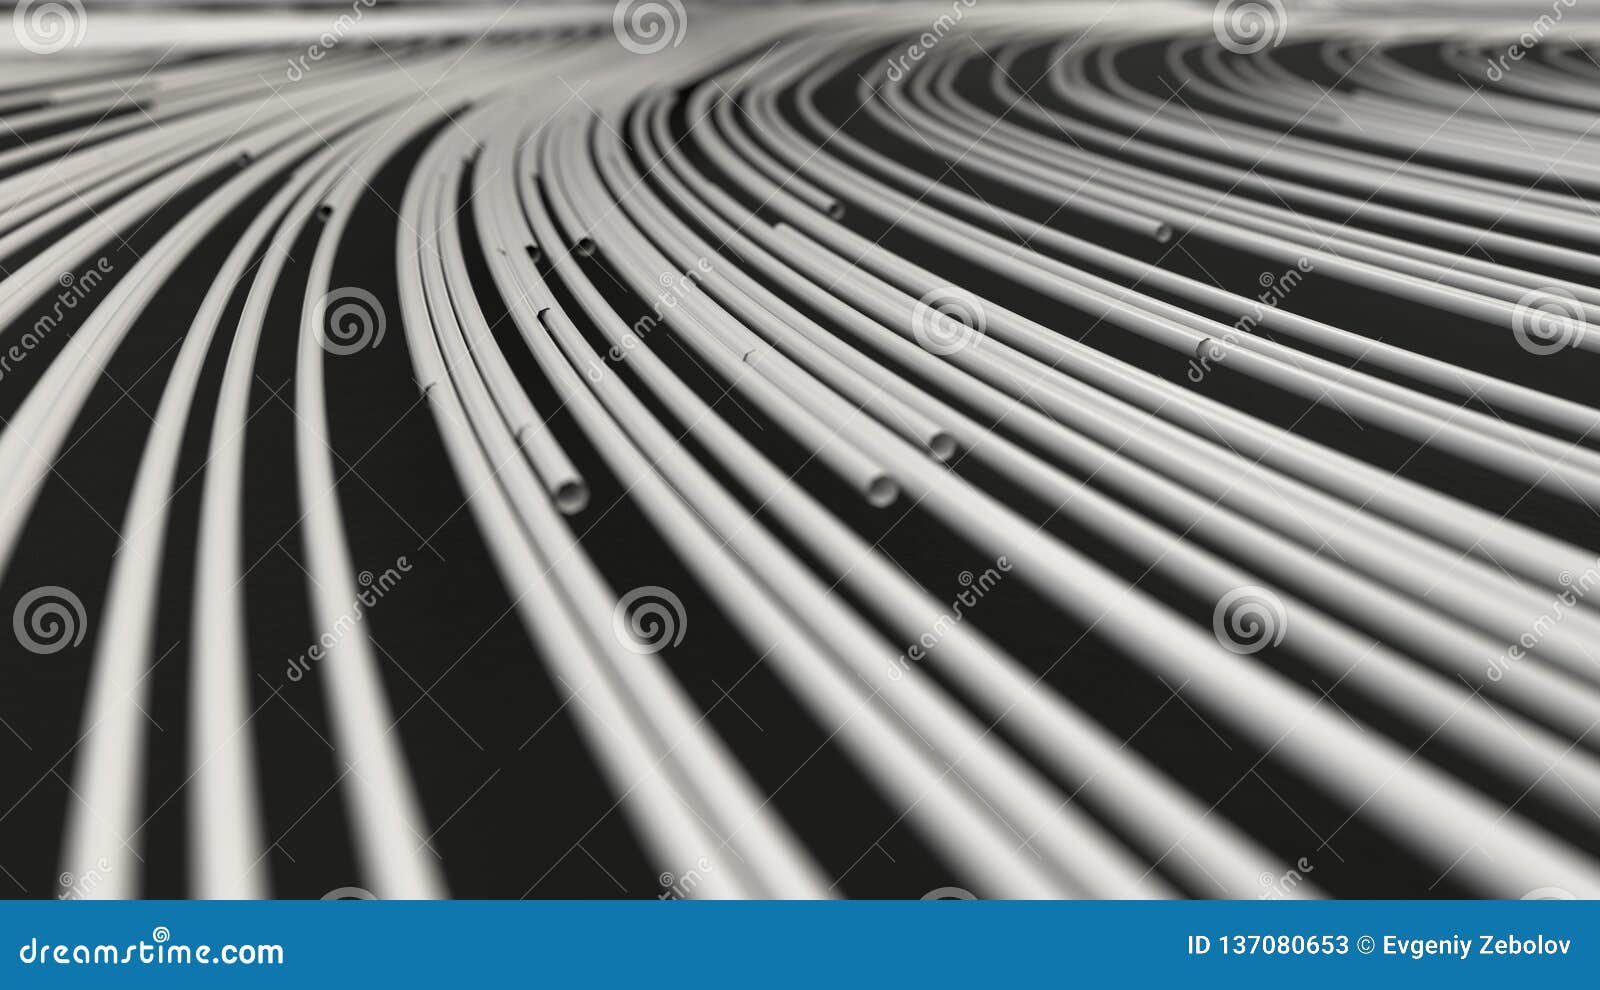 Smooth Curles from White Strings on Black Background Stock Illustration ...